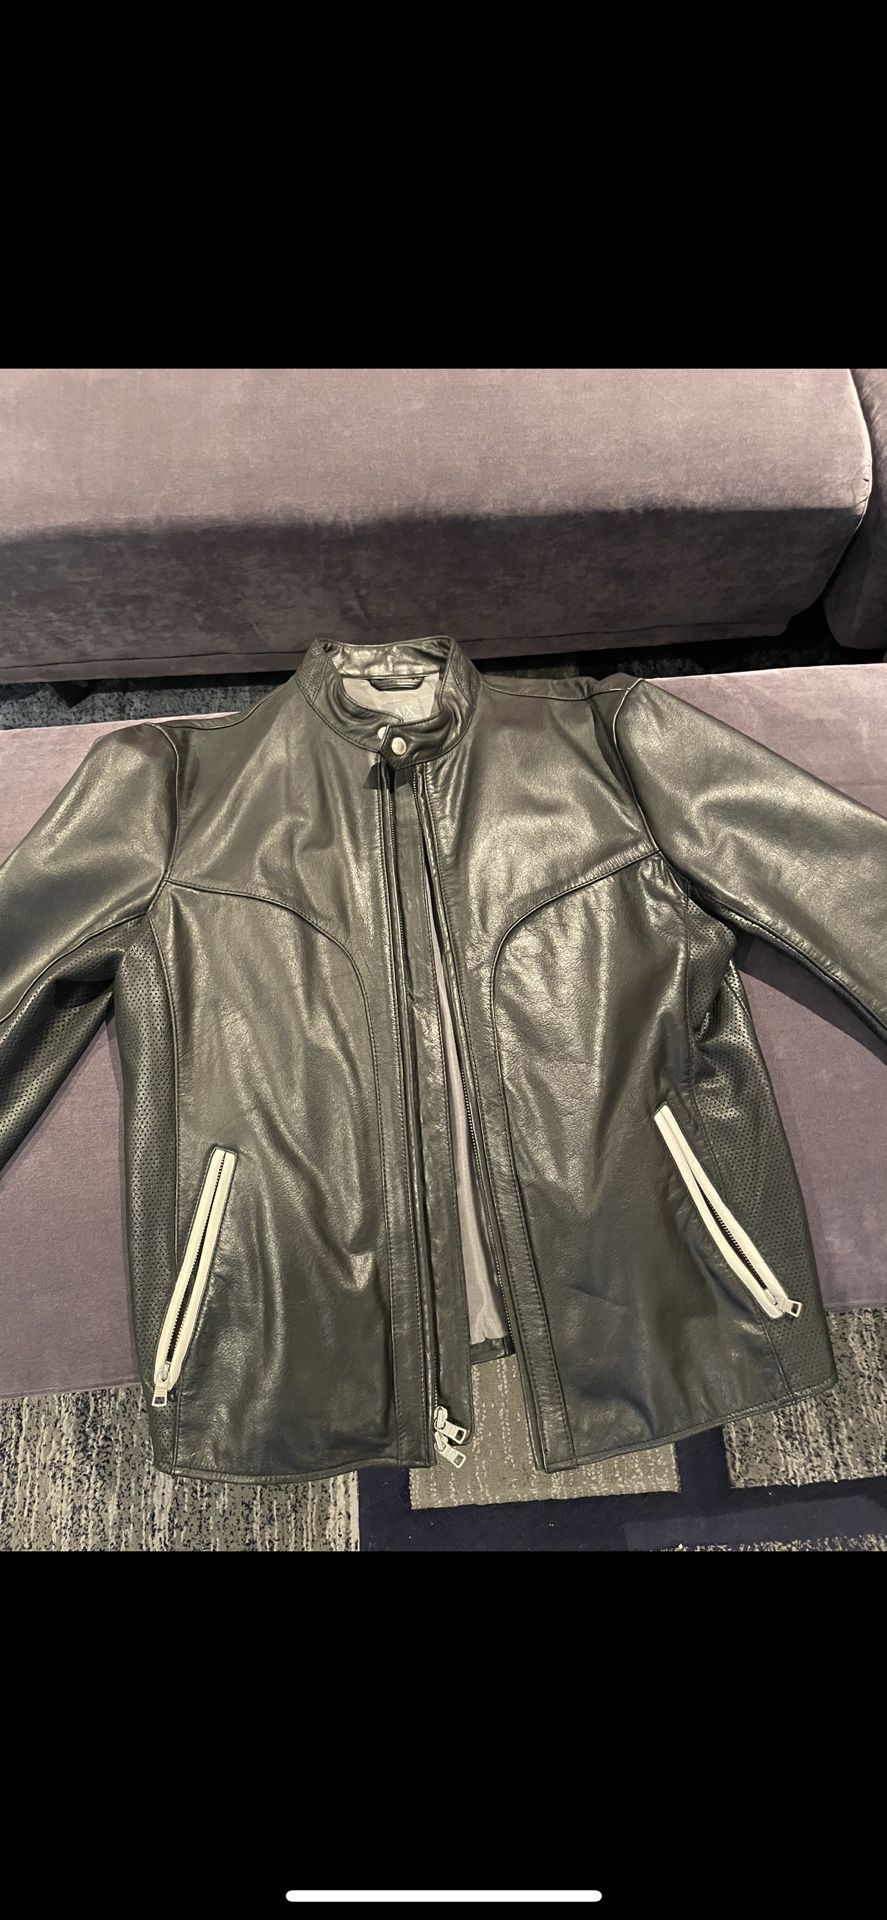 A/X Motorcycle Cut Genuine Leather Jacket 